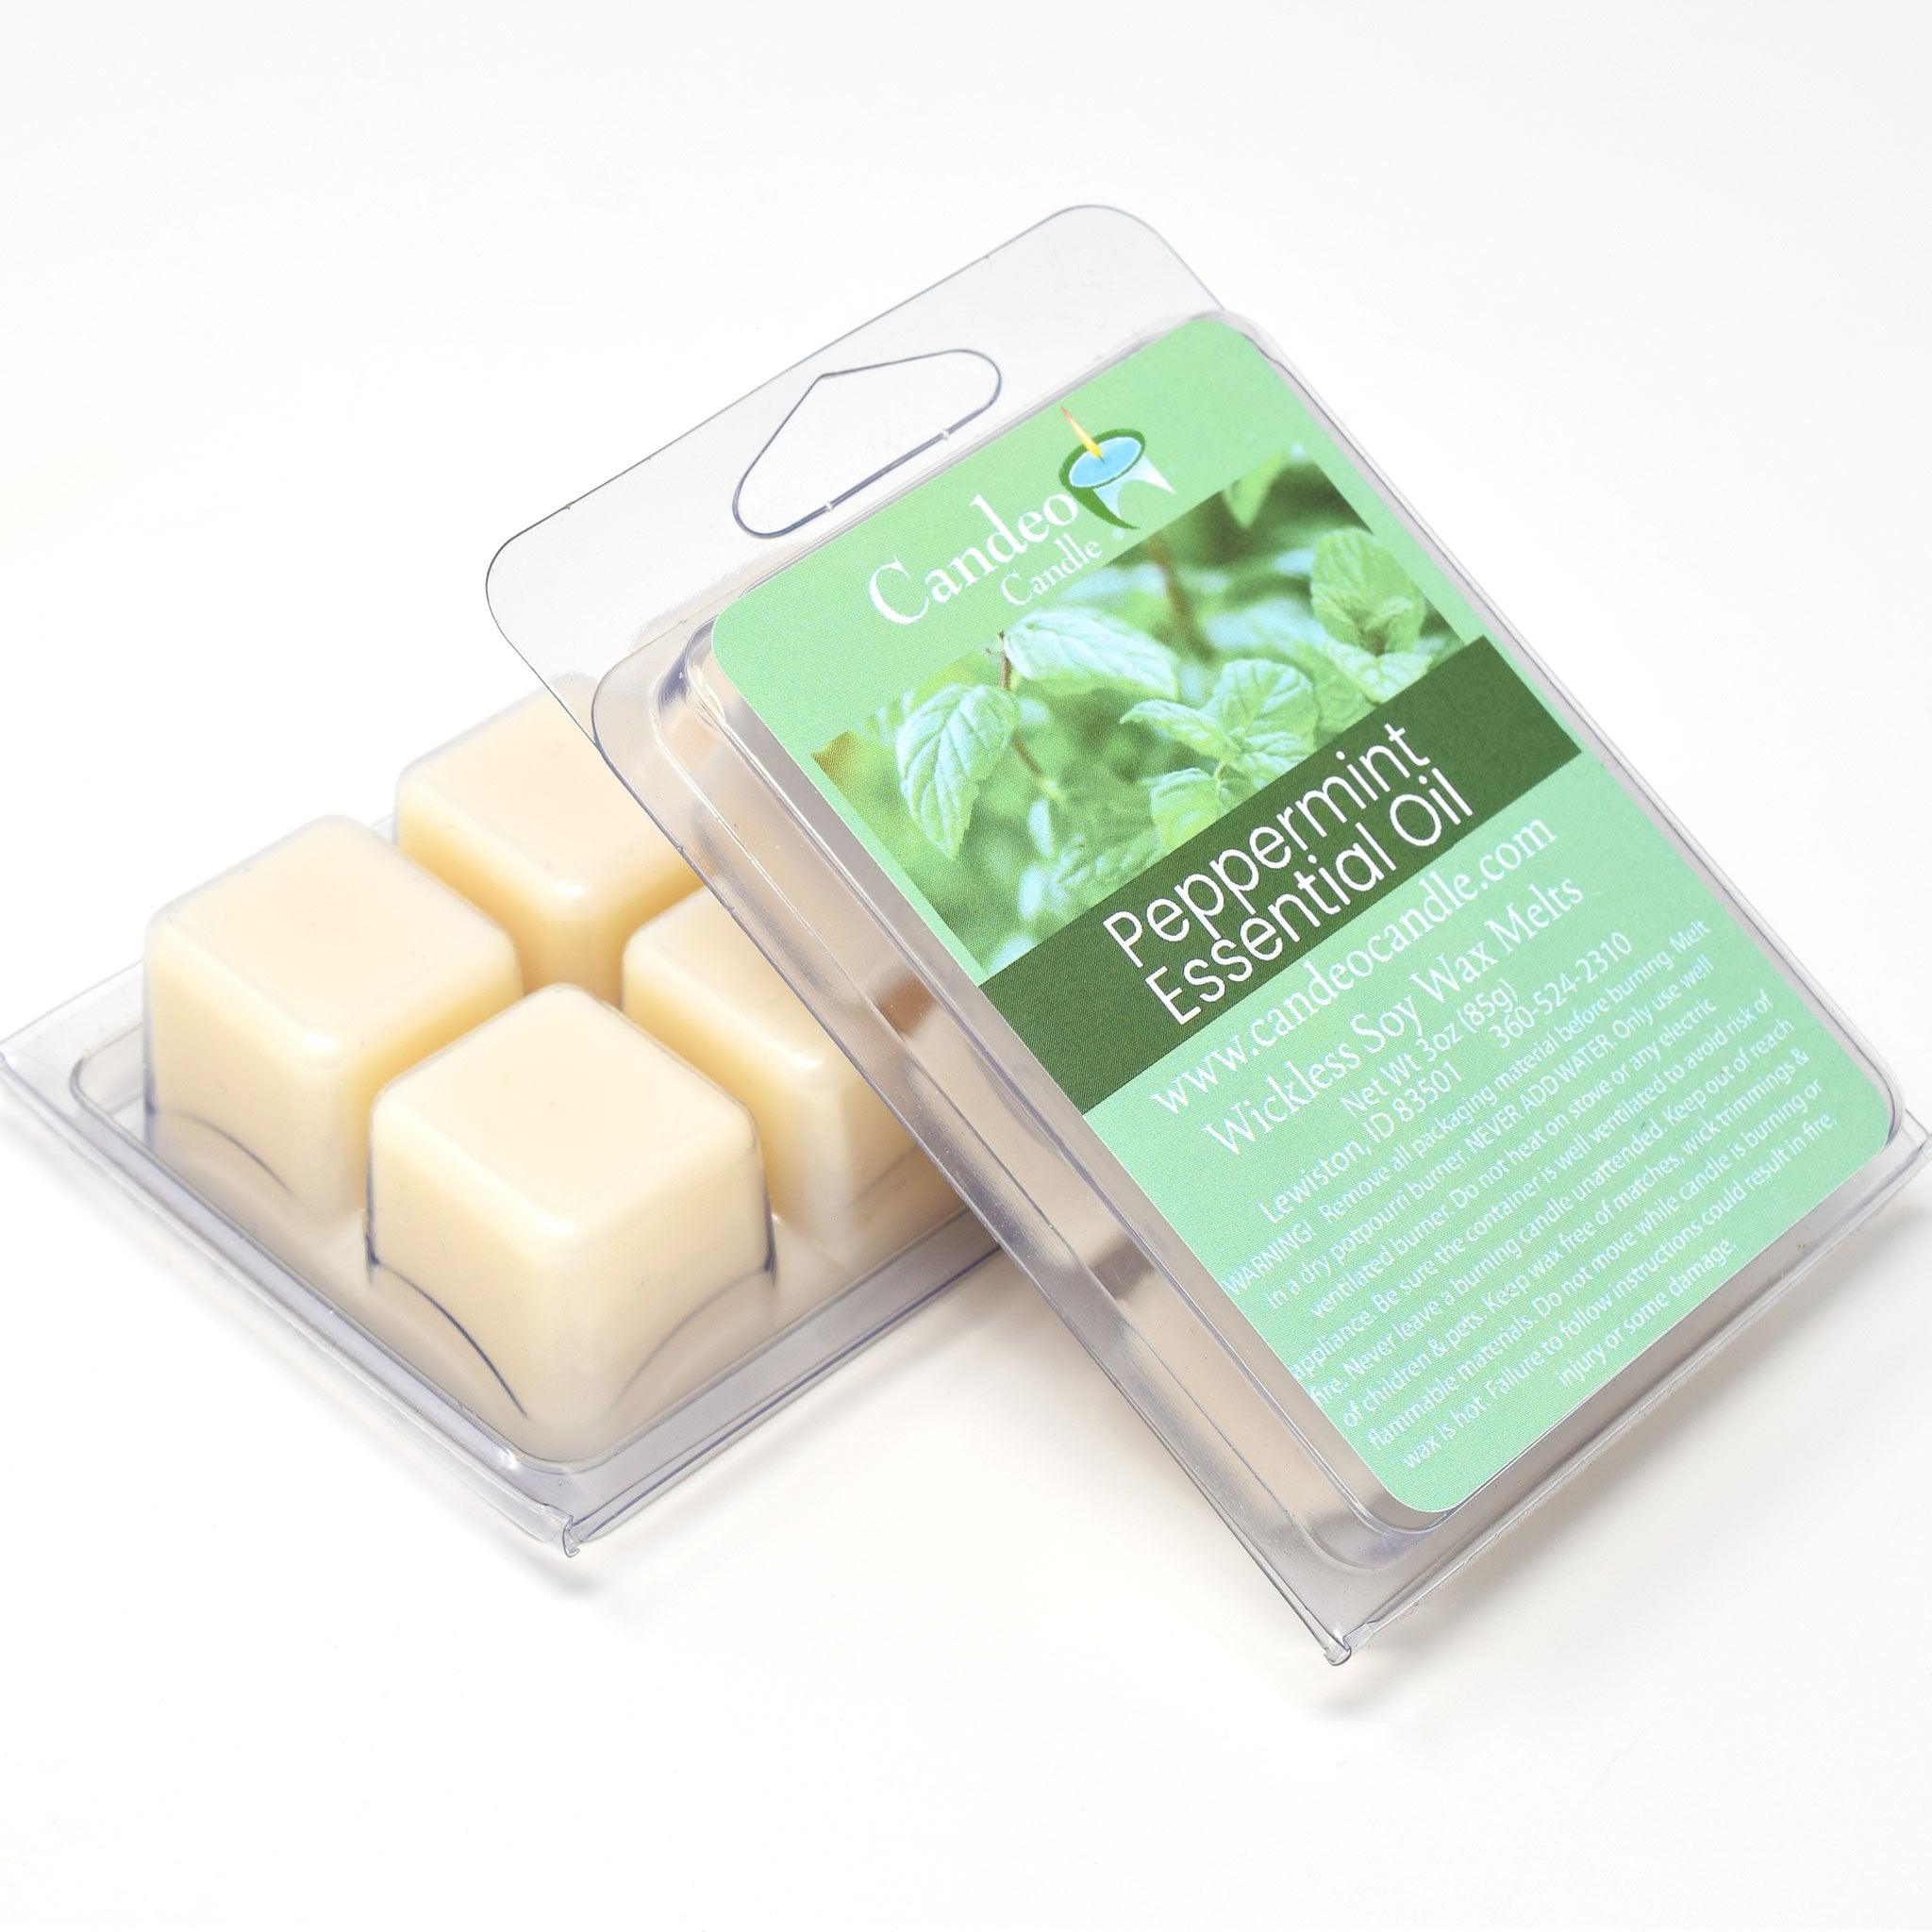 Peppermint Essential Oil, Soy Melt Cubes, 2-Pack - Candeo Candle